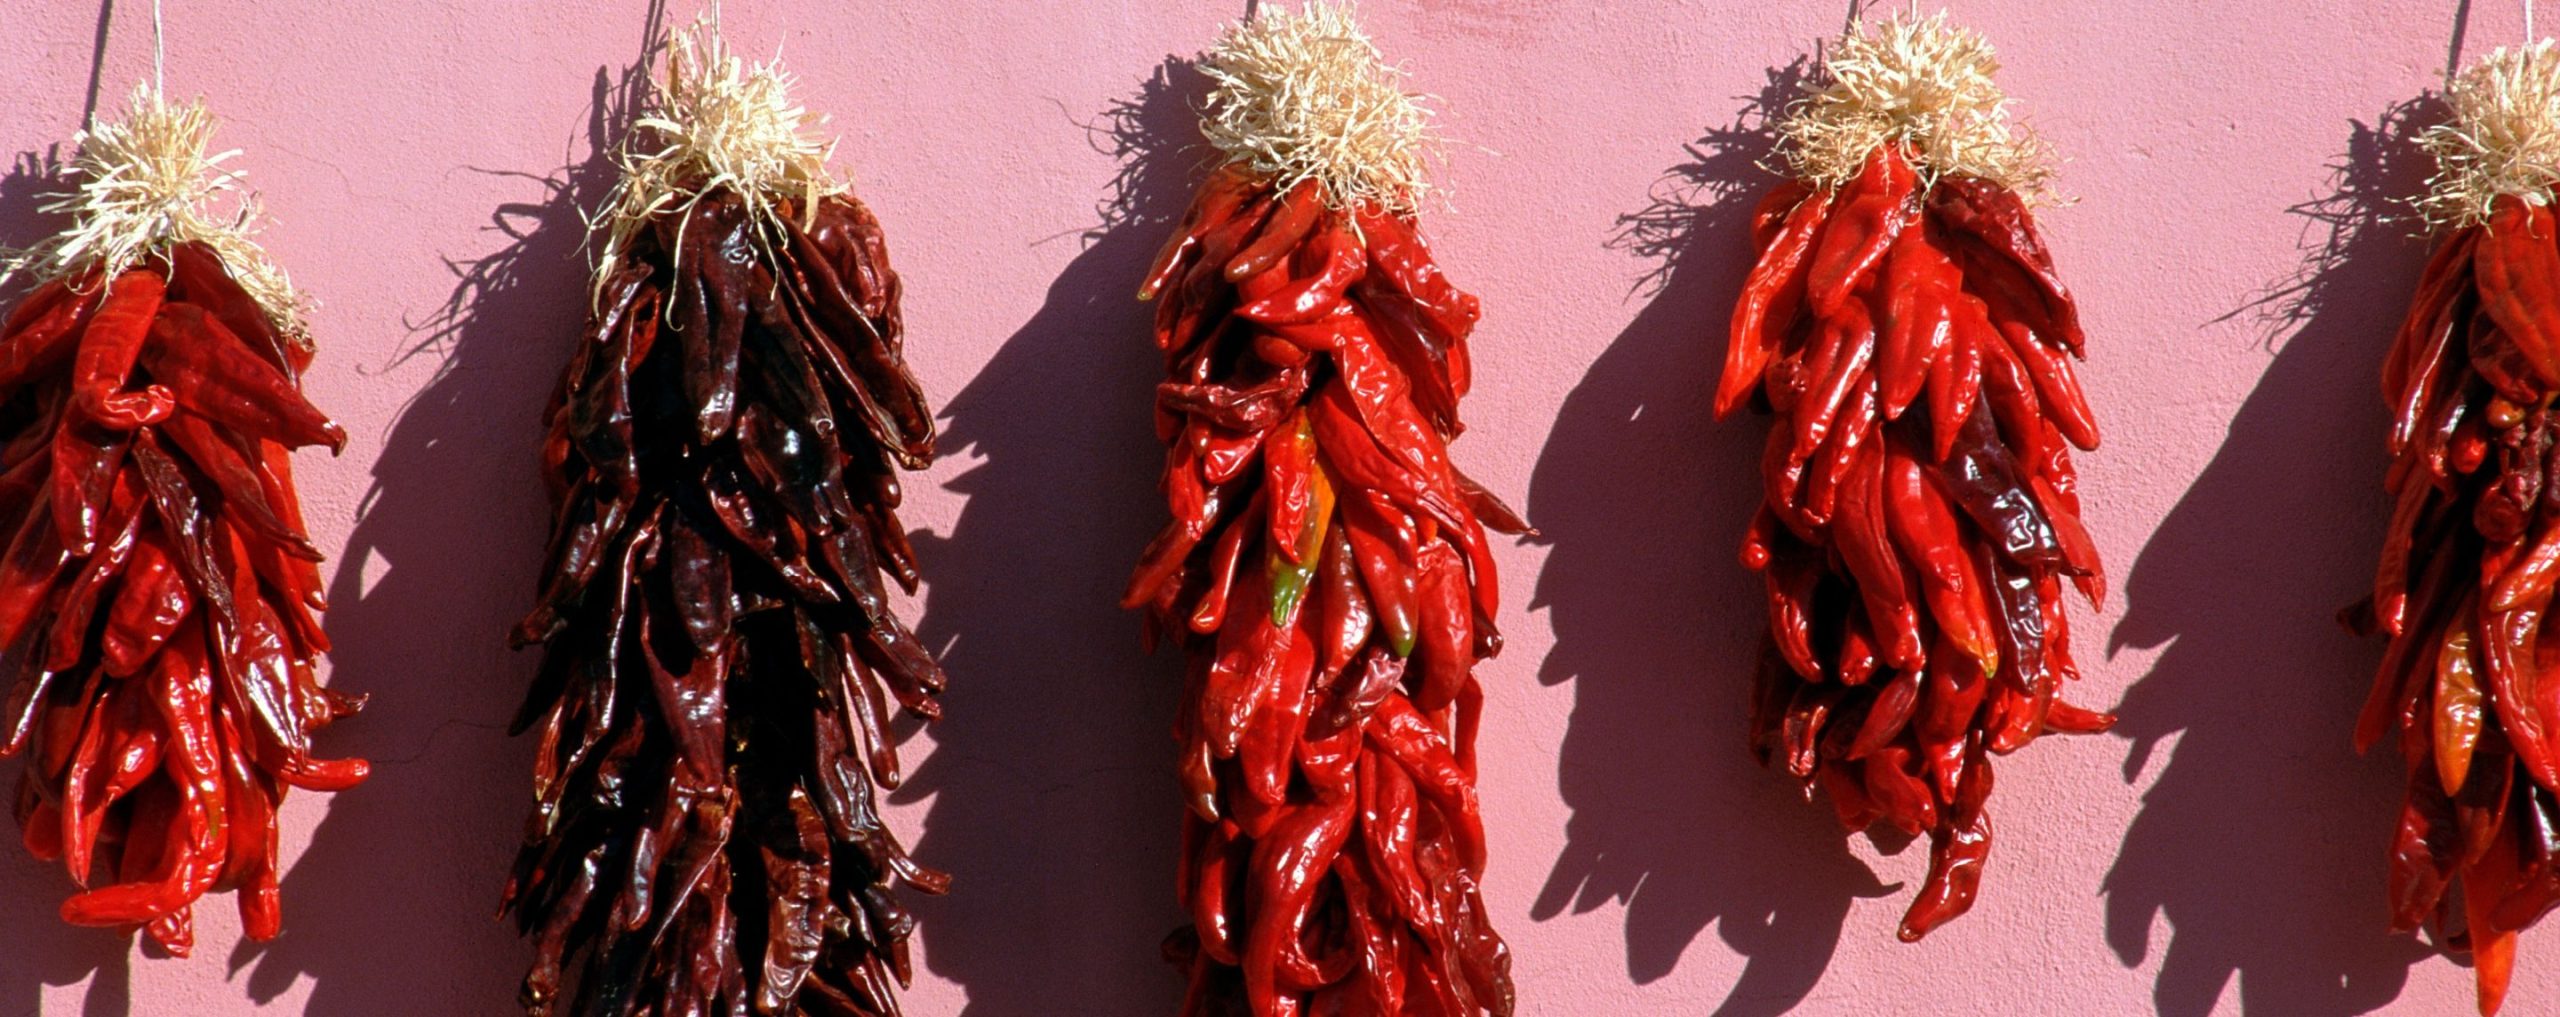 A group of ristras hanging in Albuquerque, New Mexico.